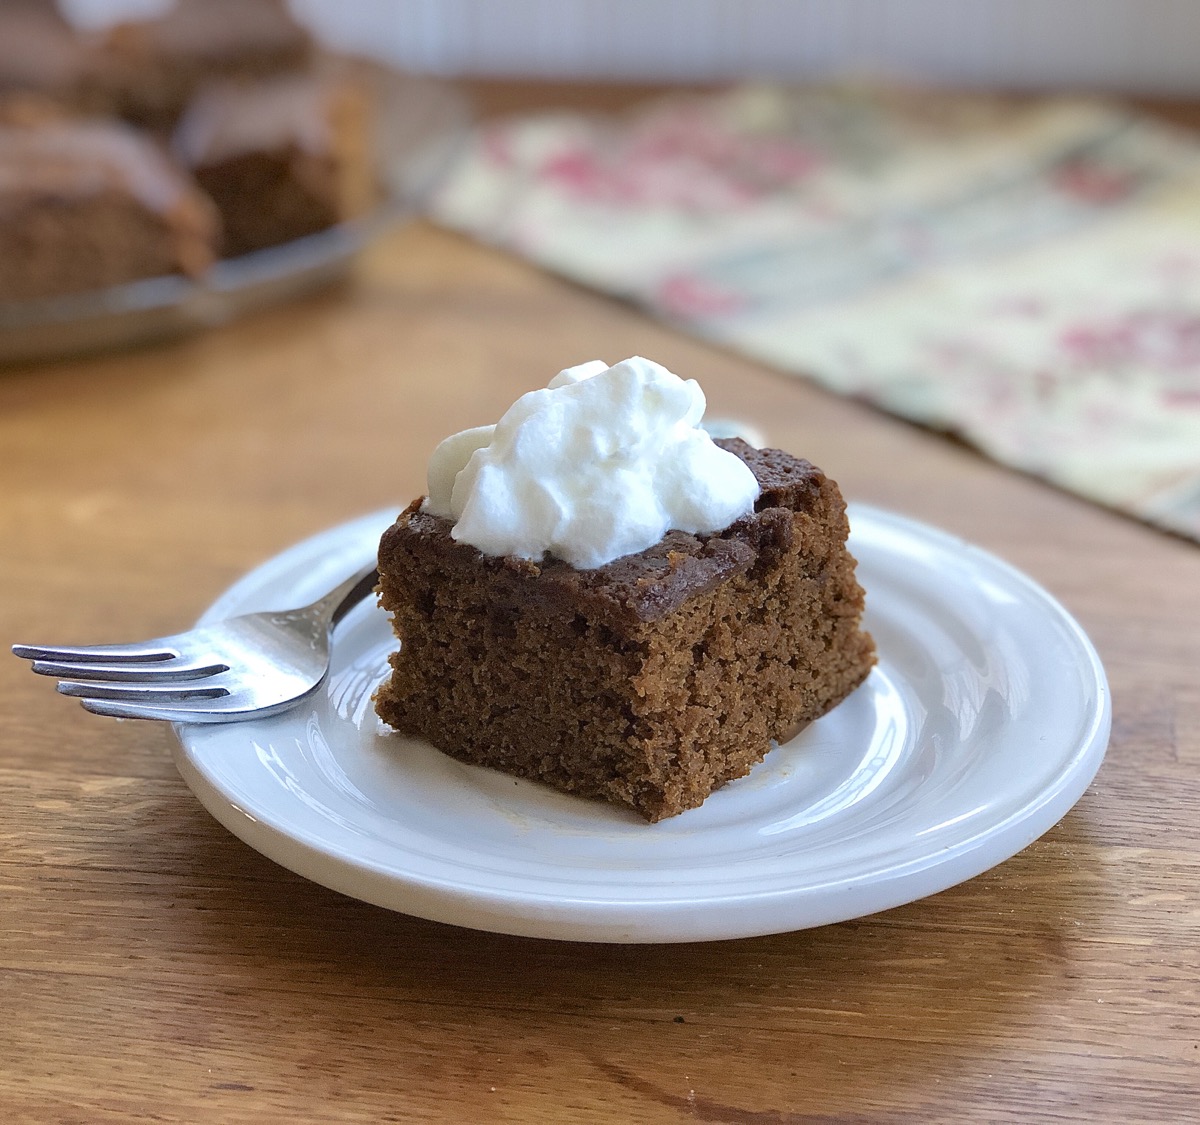 Square of gingerbread on a plate topped with whipped cream.